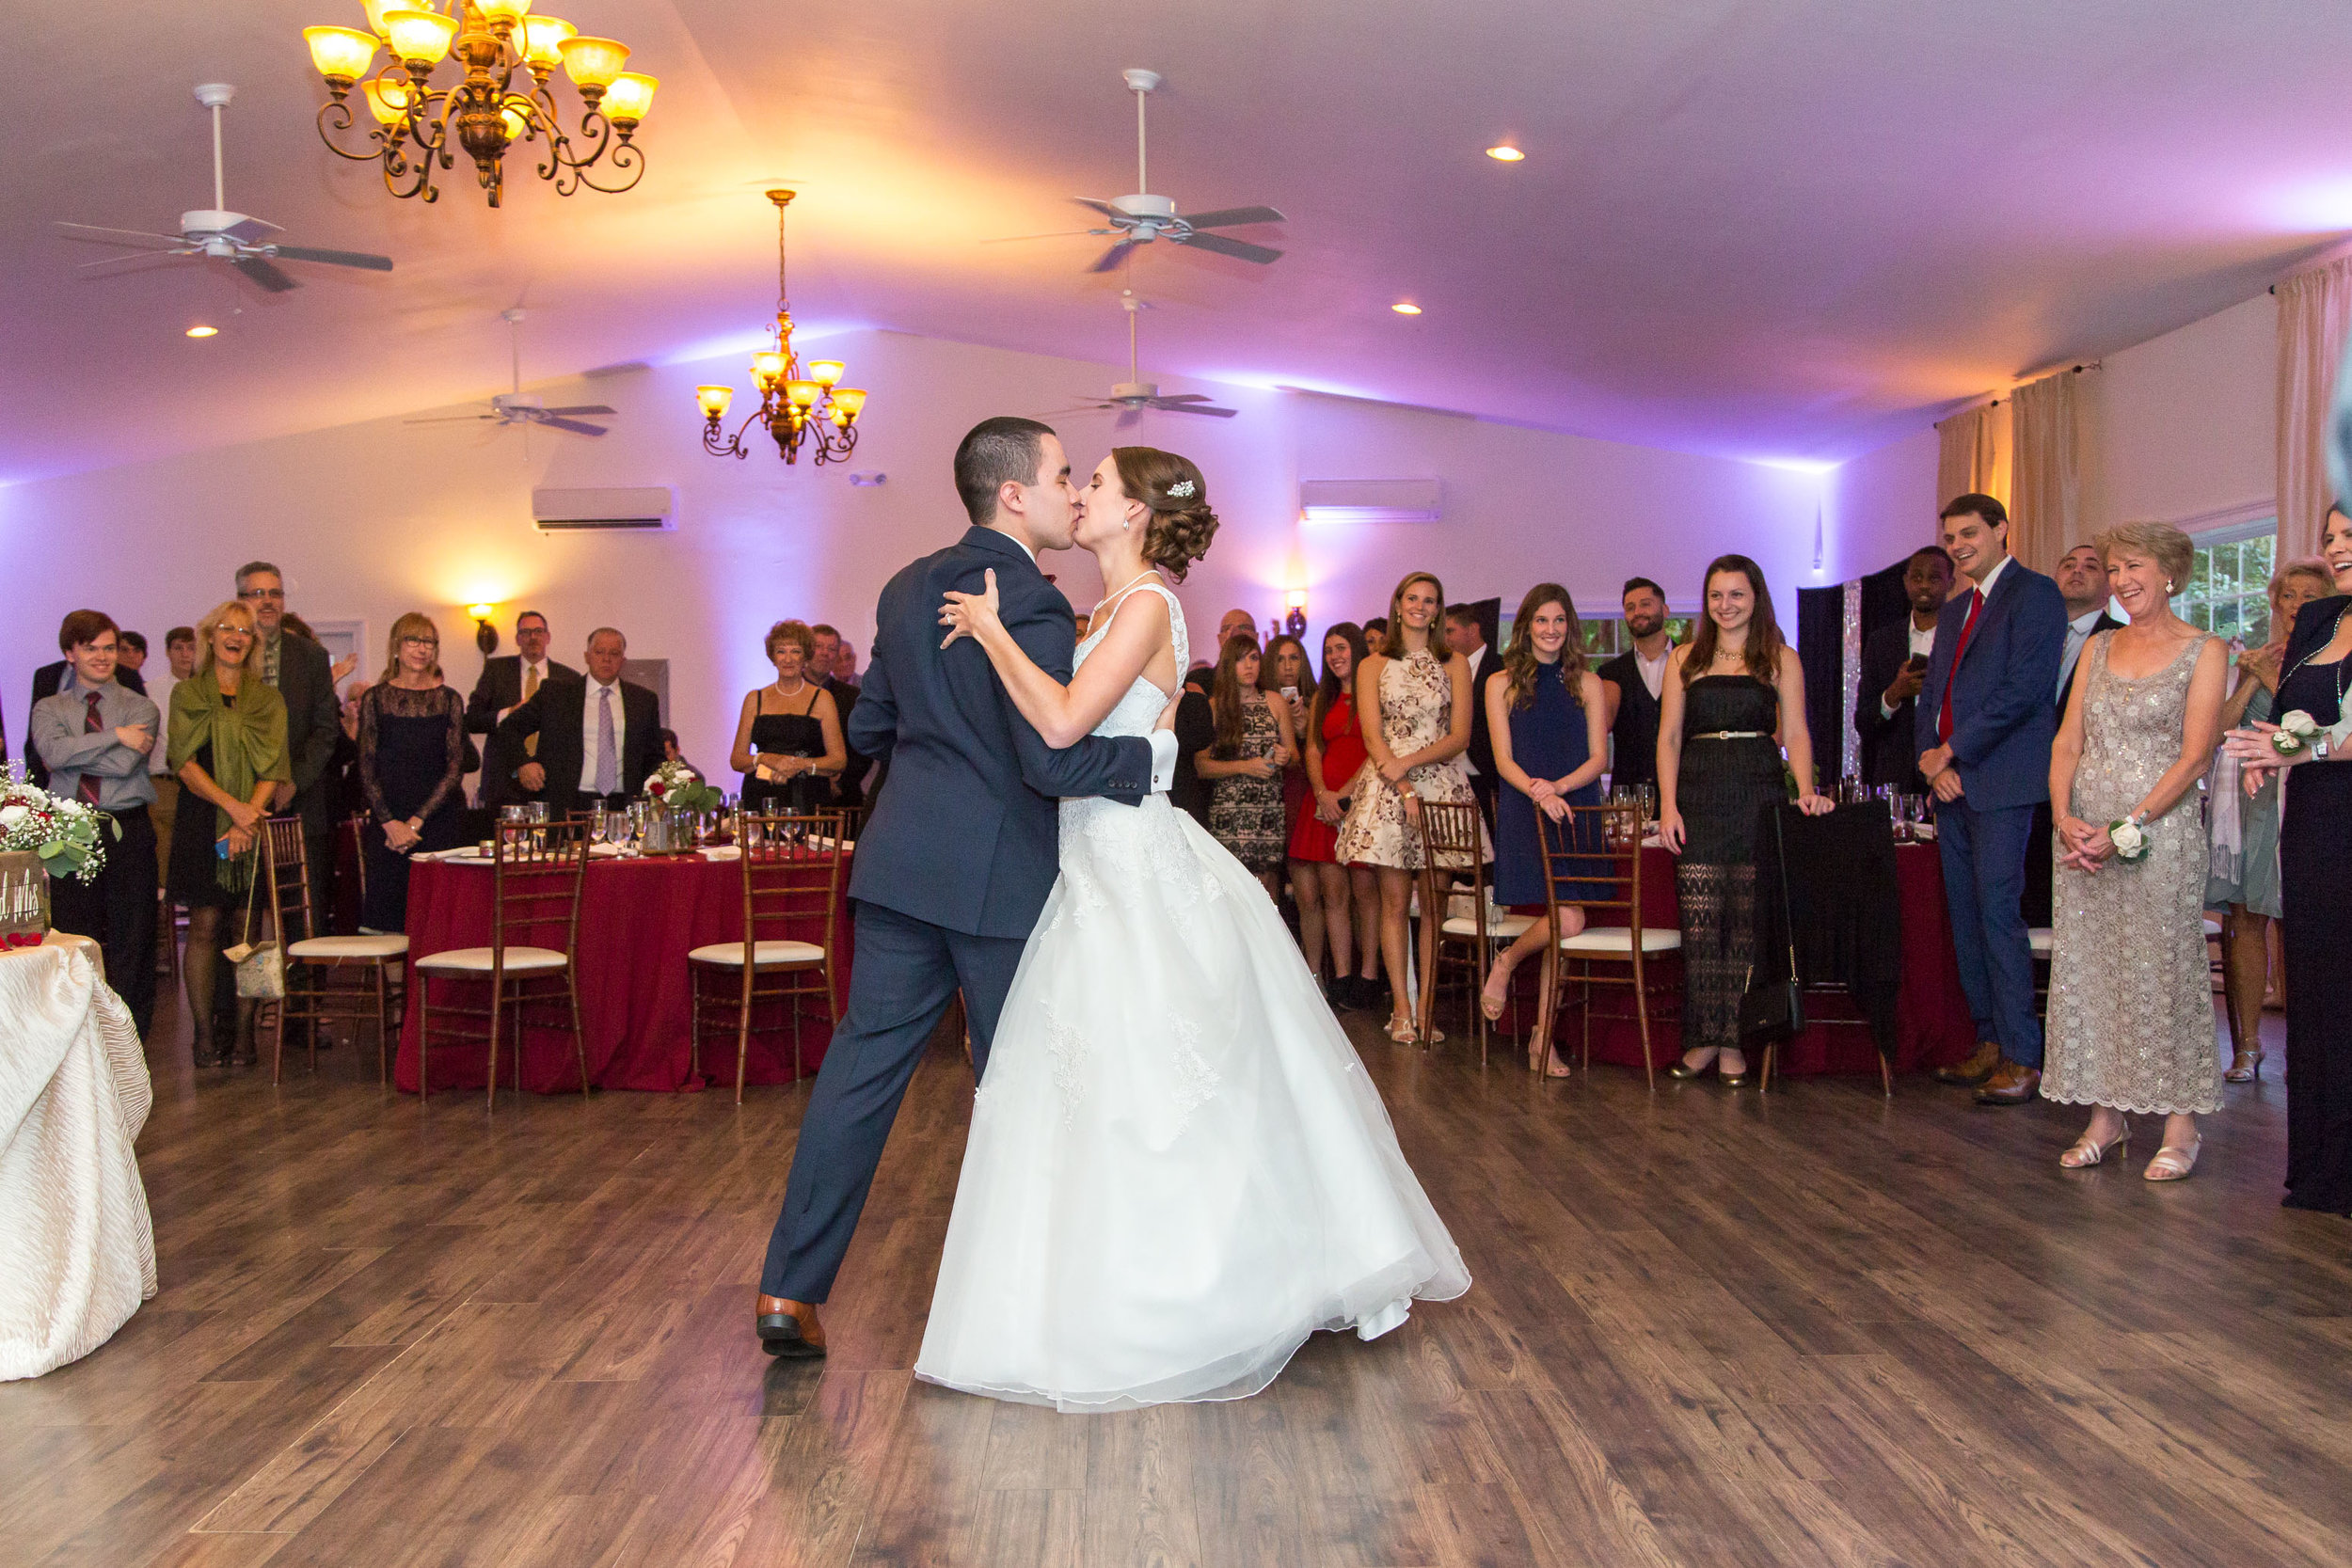 Bride and groom share their first dance at Harvest House